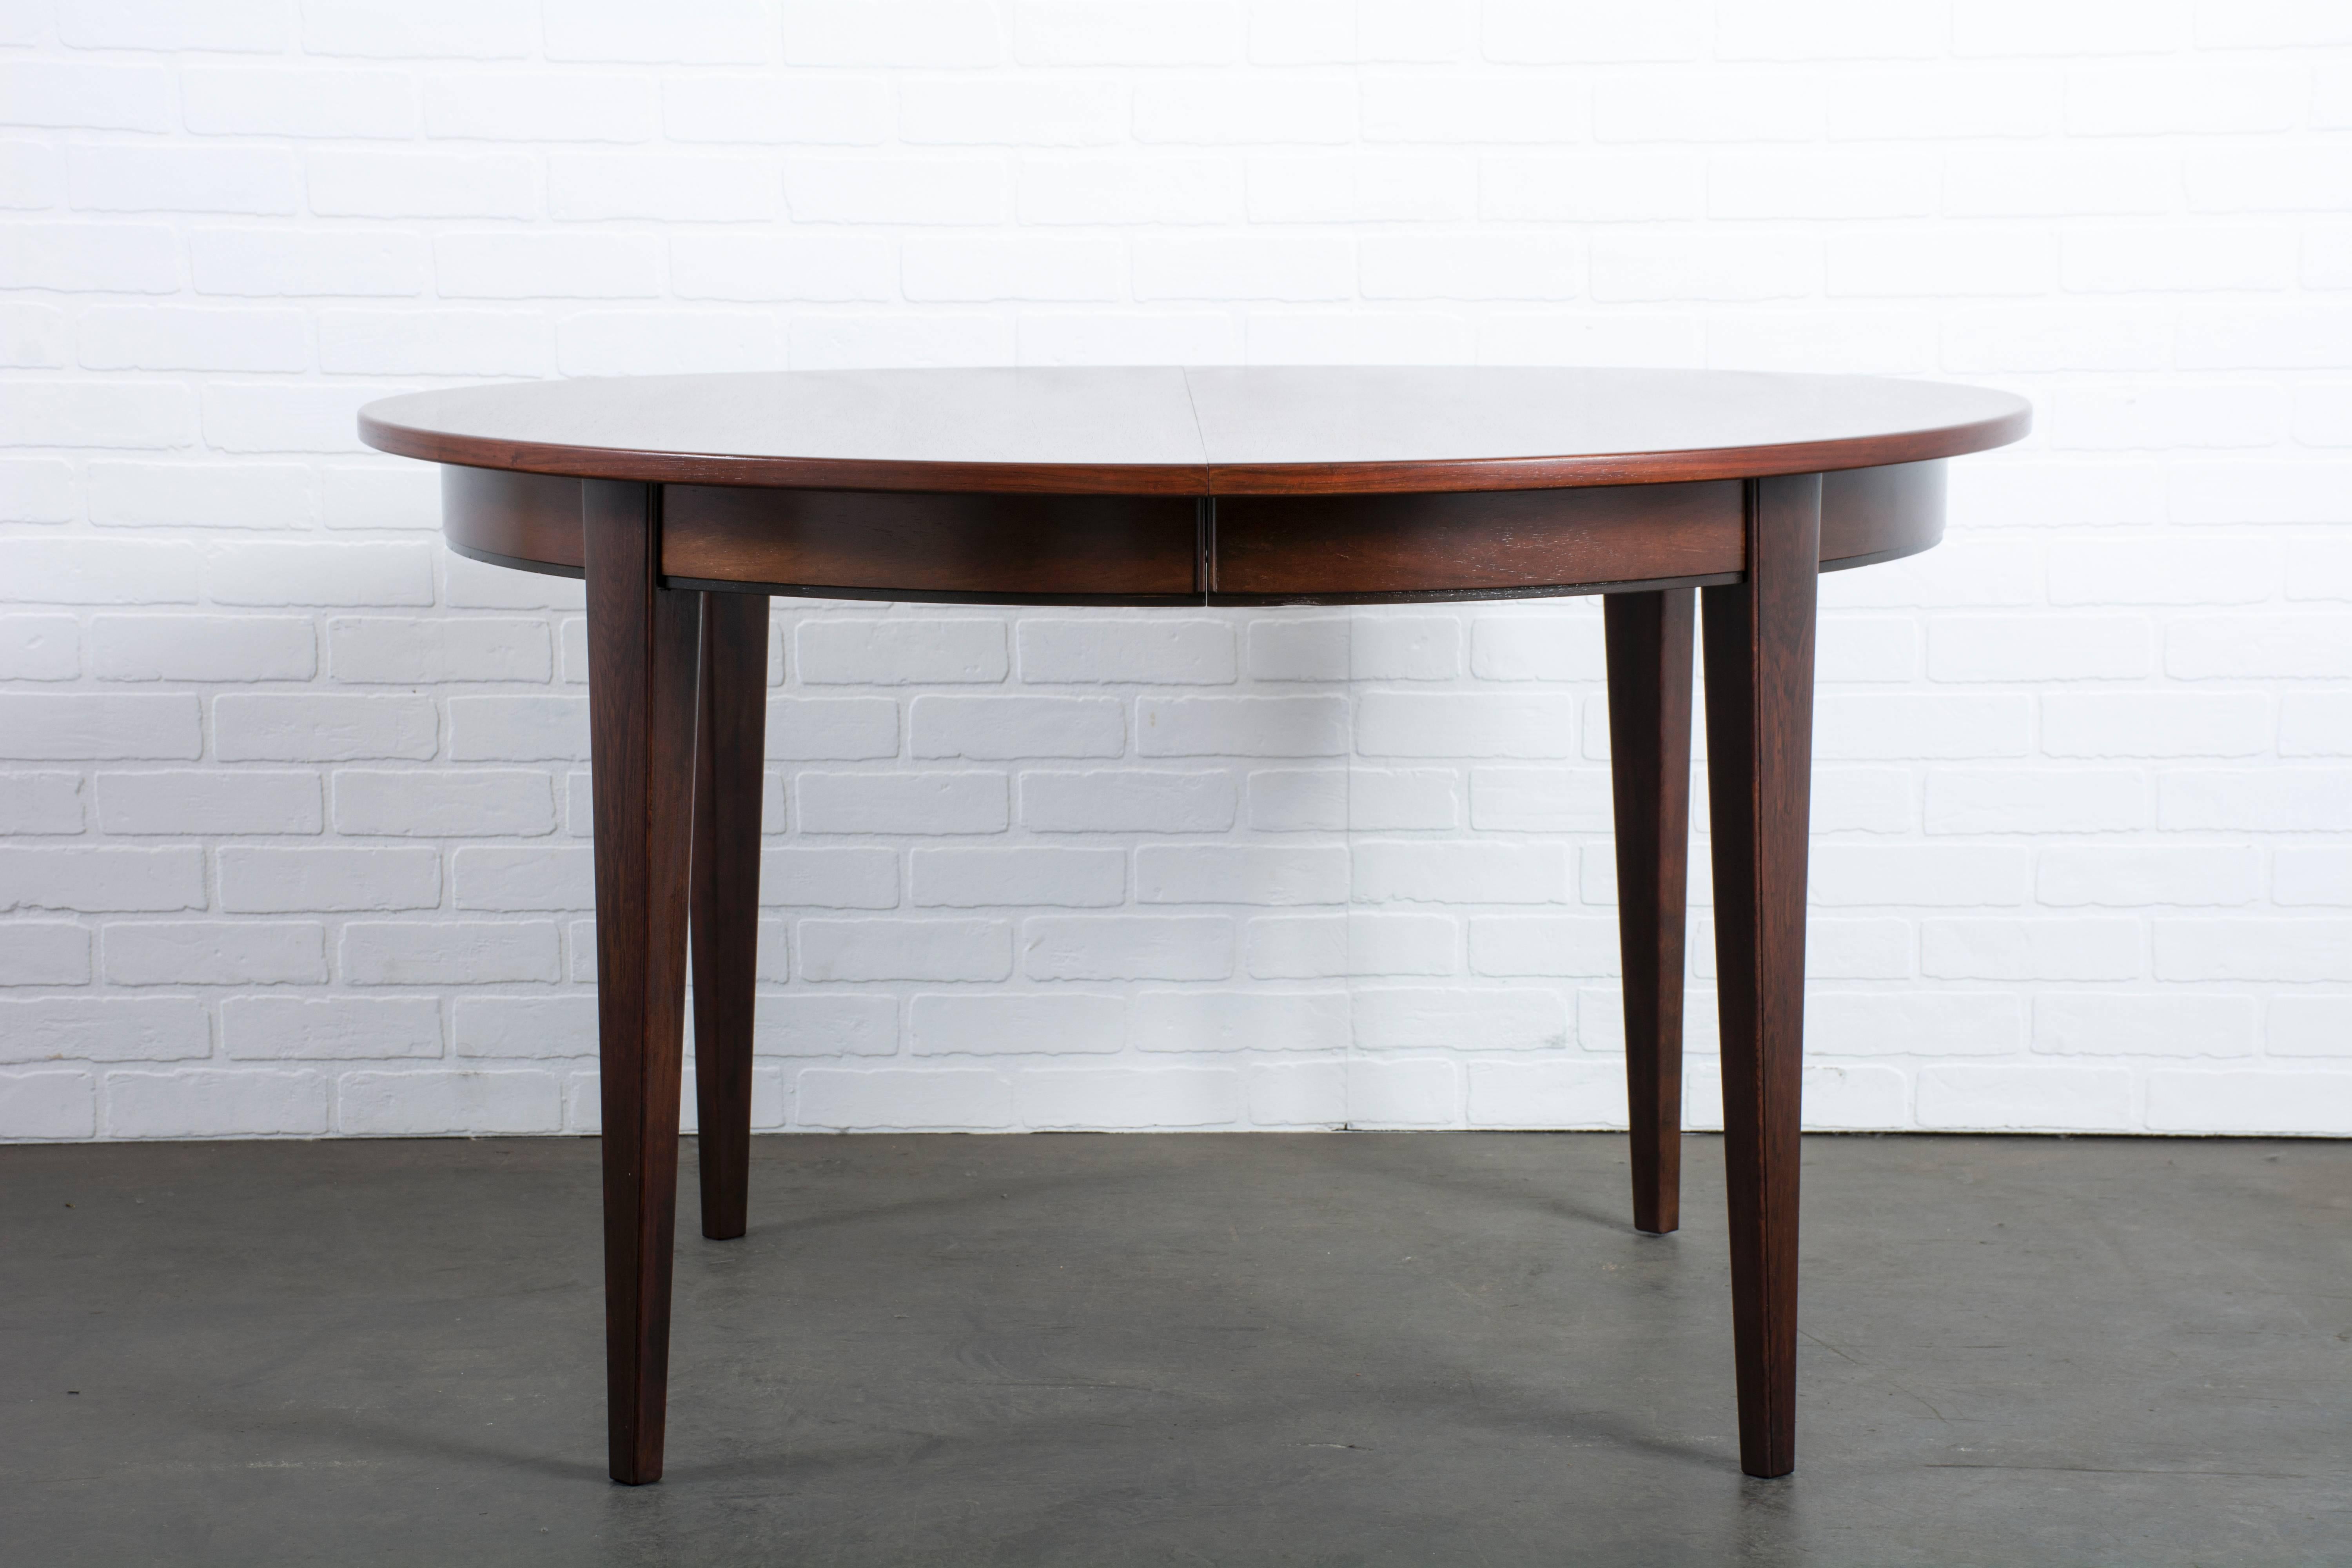 This vintage Mid-Century rosewood dining table was designed by Gunni Omann for Omann Jun in the 1950s, Denmark (Model 55). It can be used round to seat four people or with up to three additional leaves. One of the leaves is rosewood and matches the